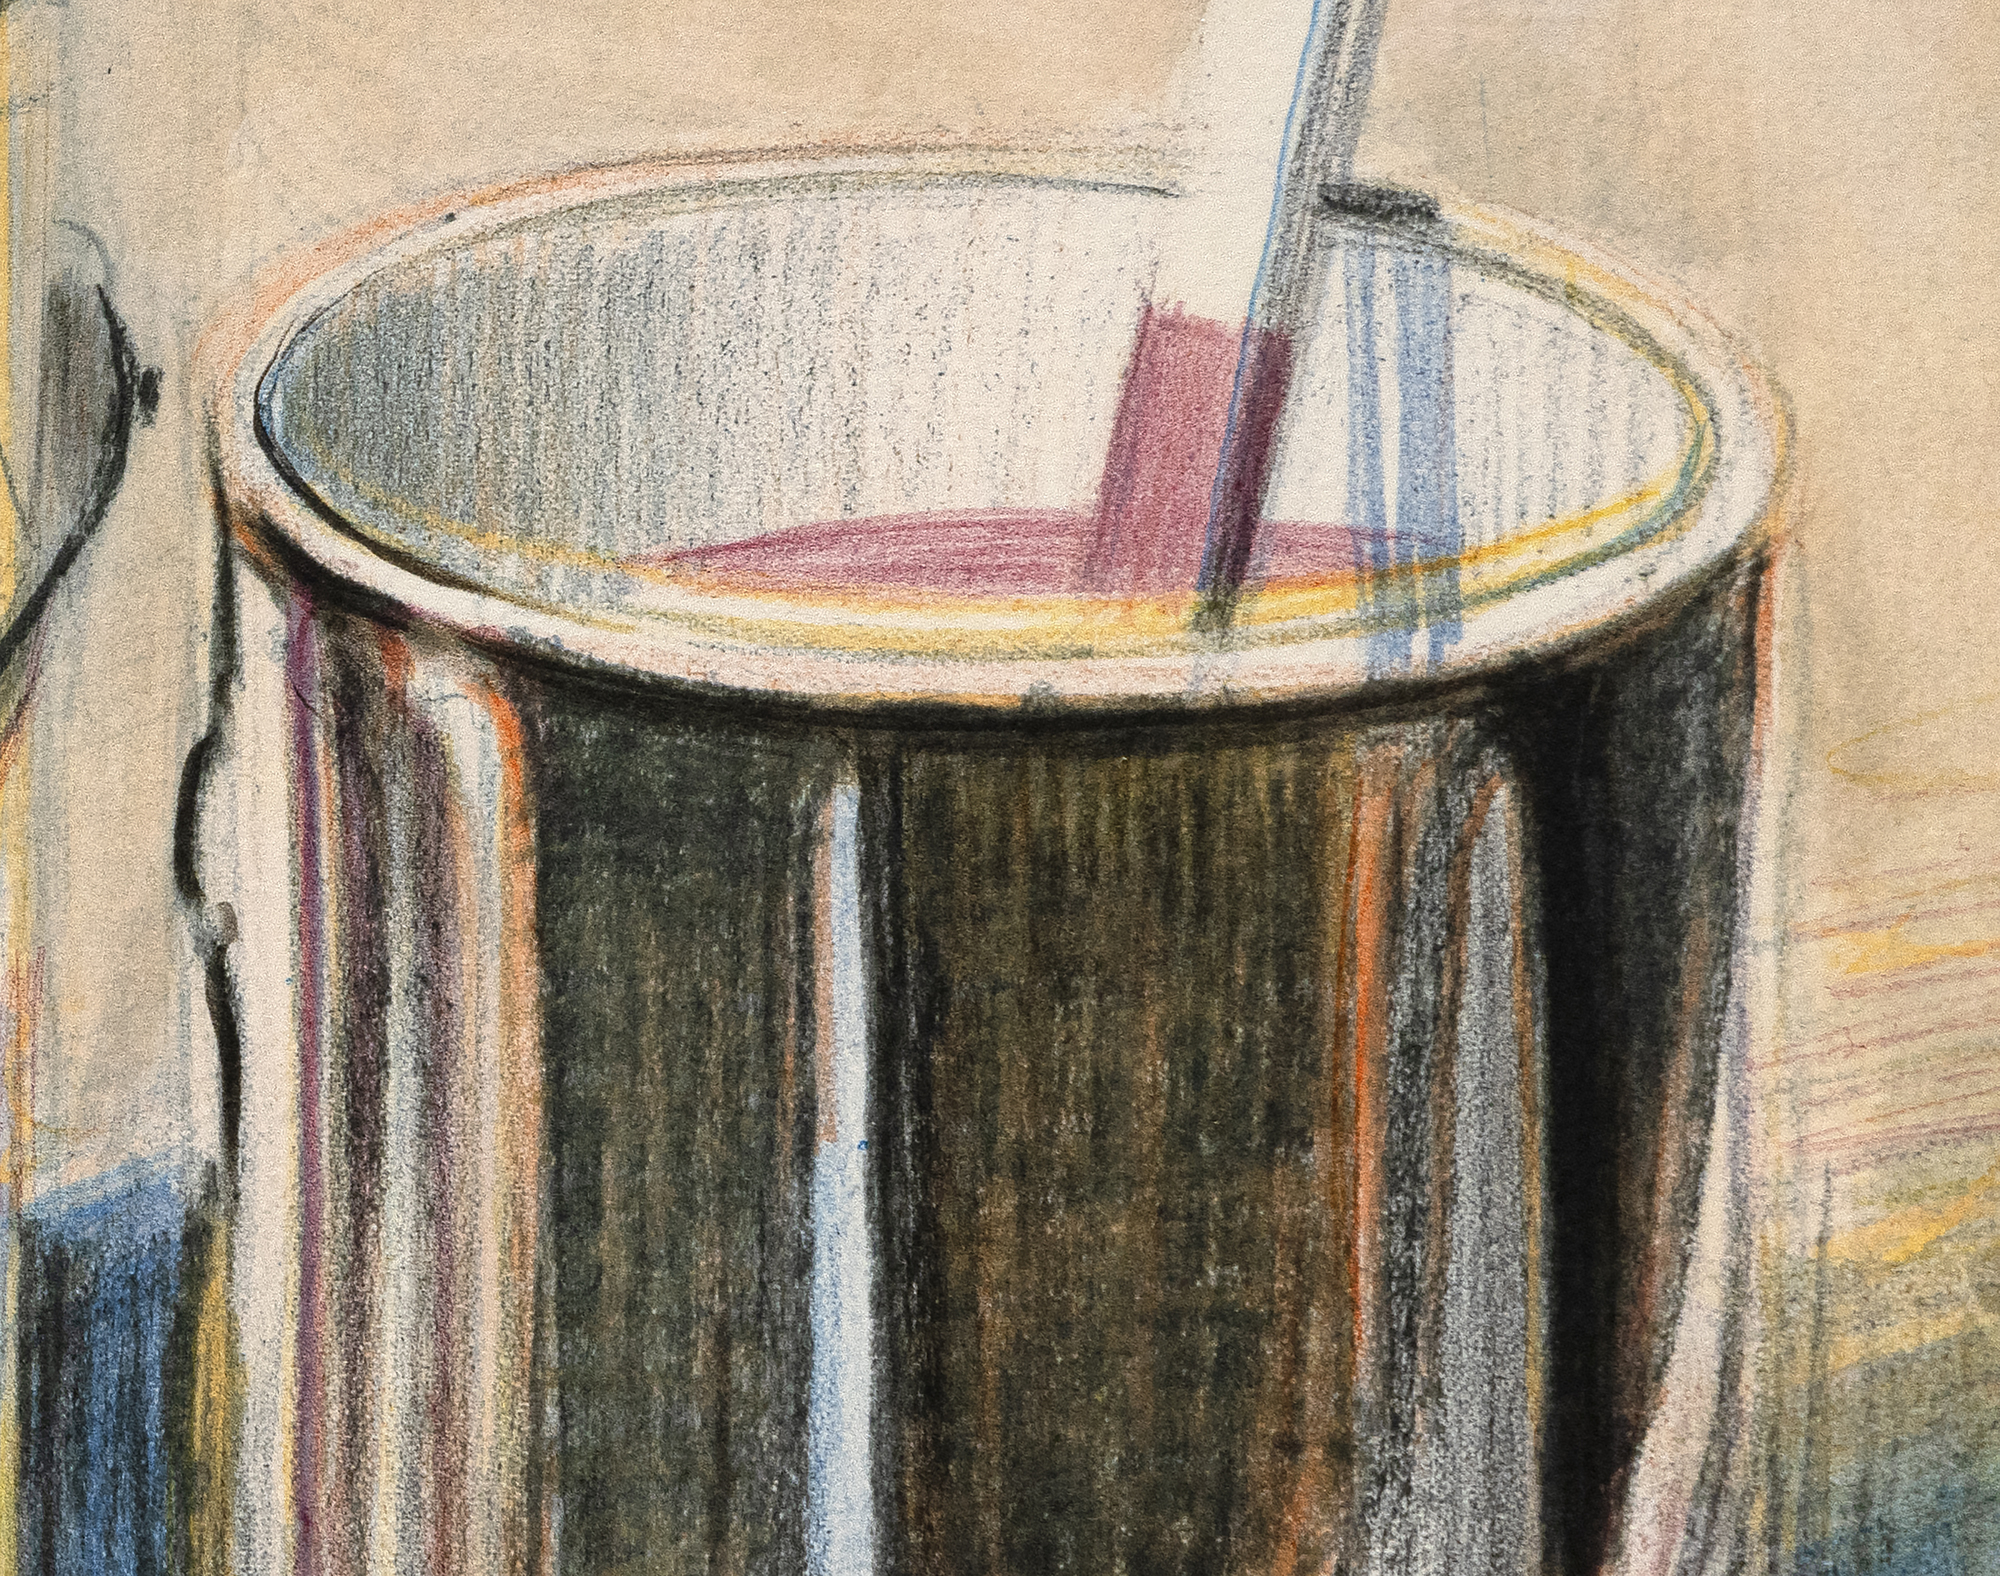 WAYNE THIEBAUD - Paint Cans - lithograph in colors on wove paper - 38 3/4 x 29 1/8 in.